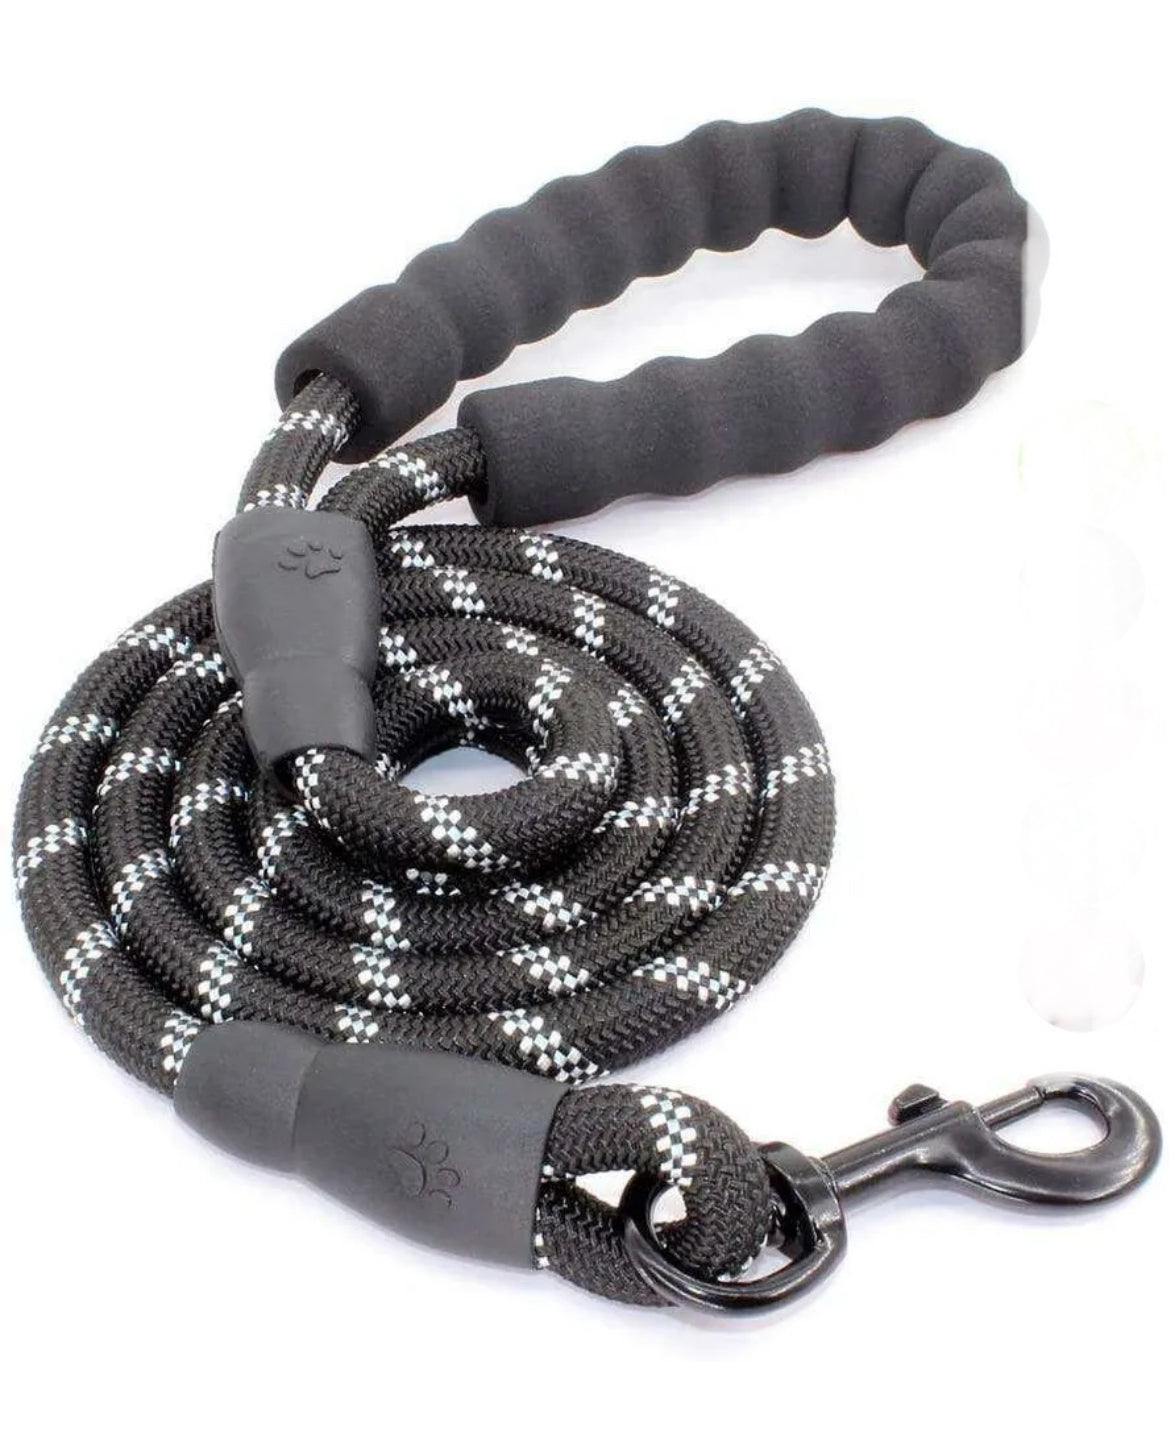 5ft Reflective Dog Leads